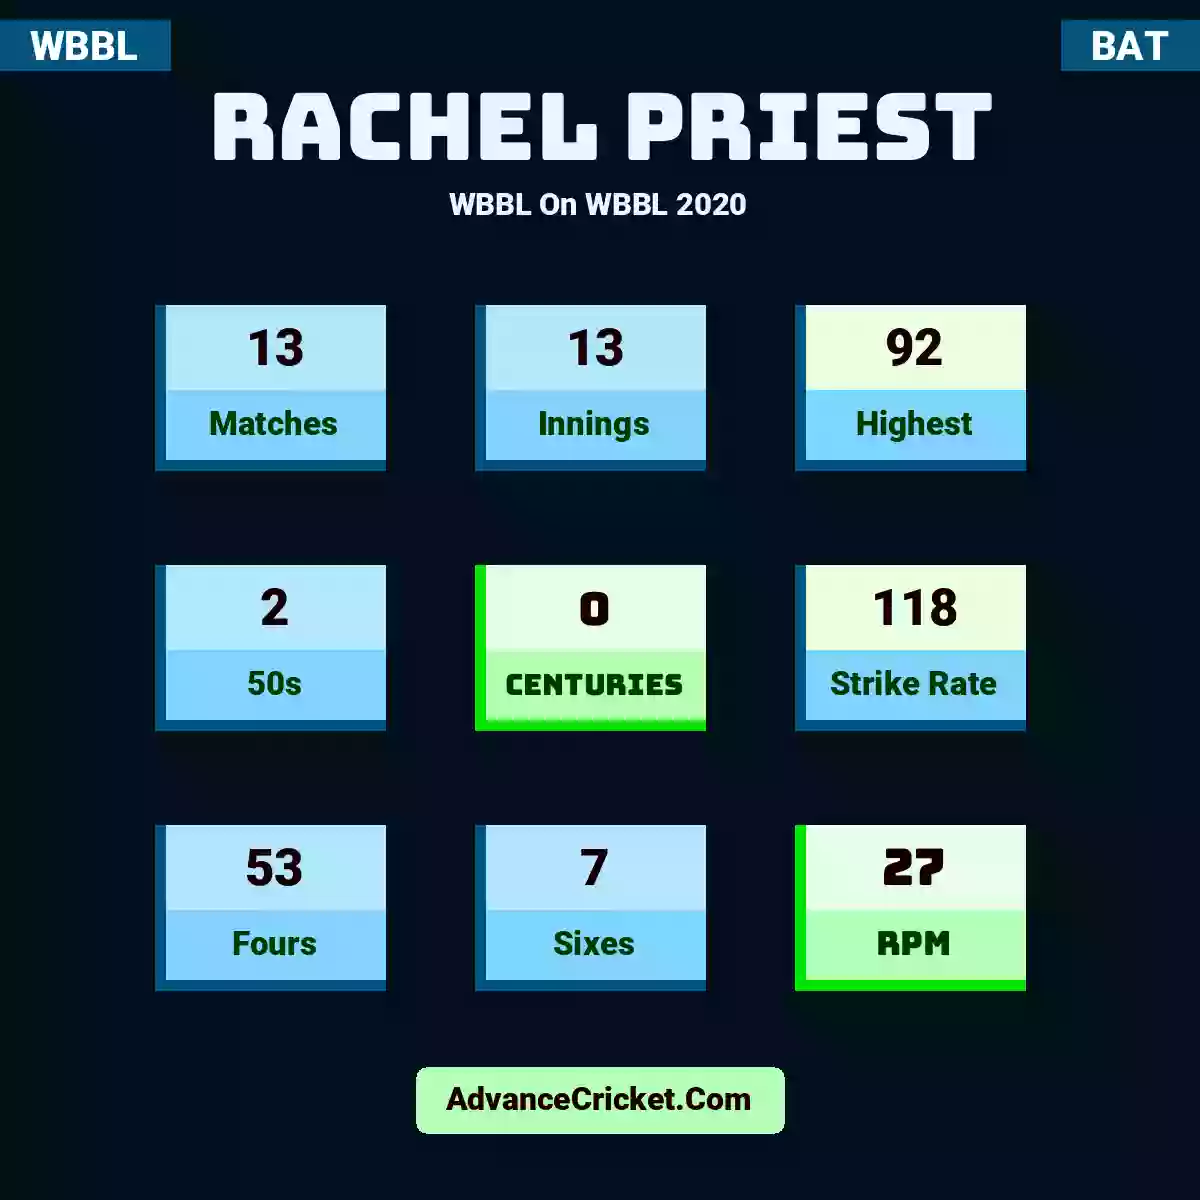 Rachel Priest WBBL  On WBBL 2020, Rachel Priest played 13 matches, scored 92 runs as highest, 2 half-centuries, and 0 centuries, with a strike rate of 118. R.Priest hit 53 fours and 7 sixes, with an RPM of 27.